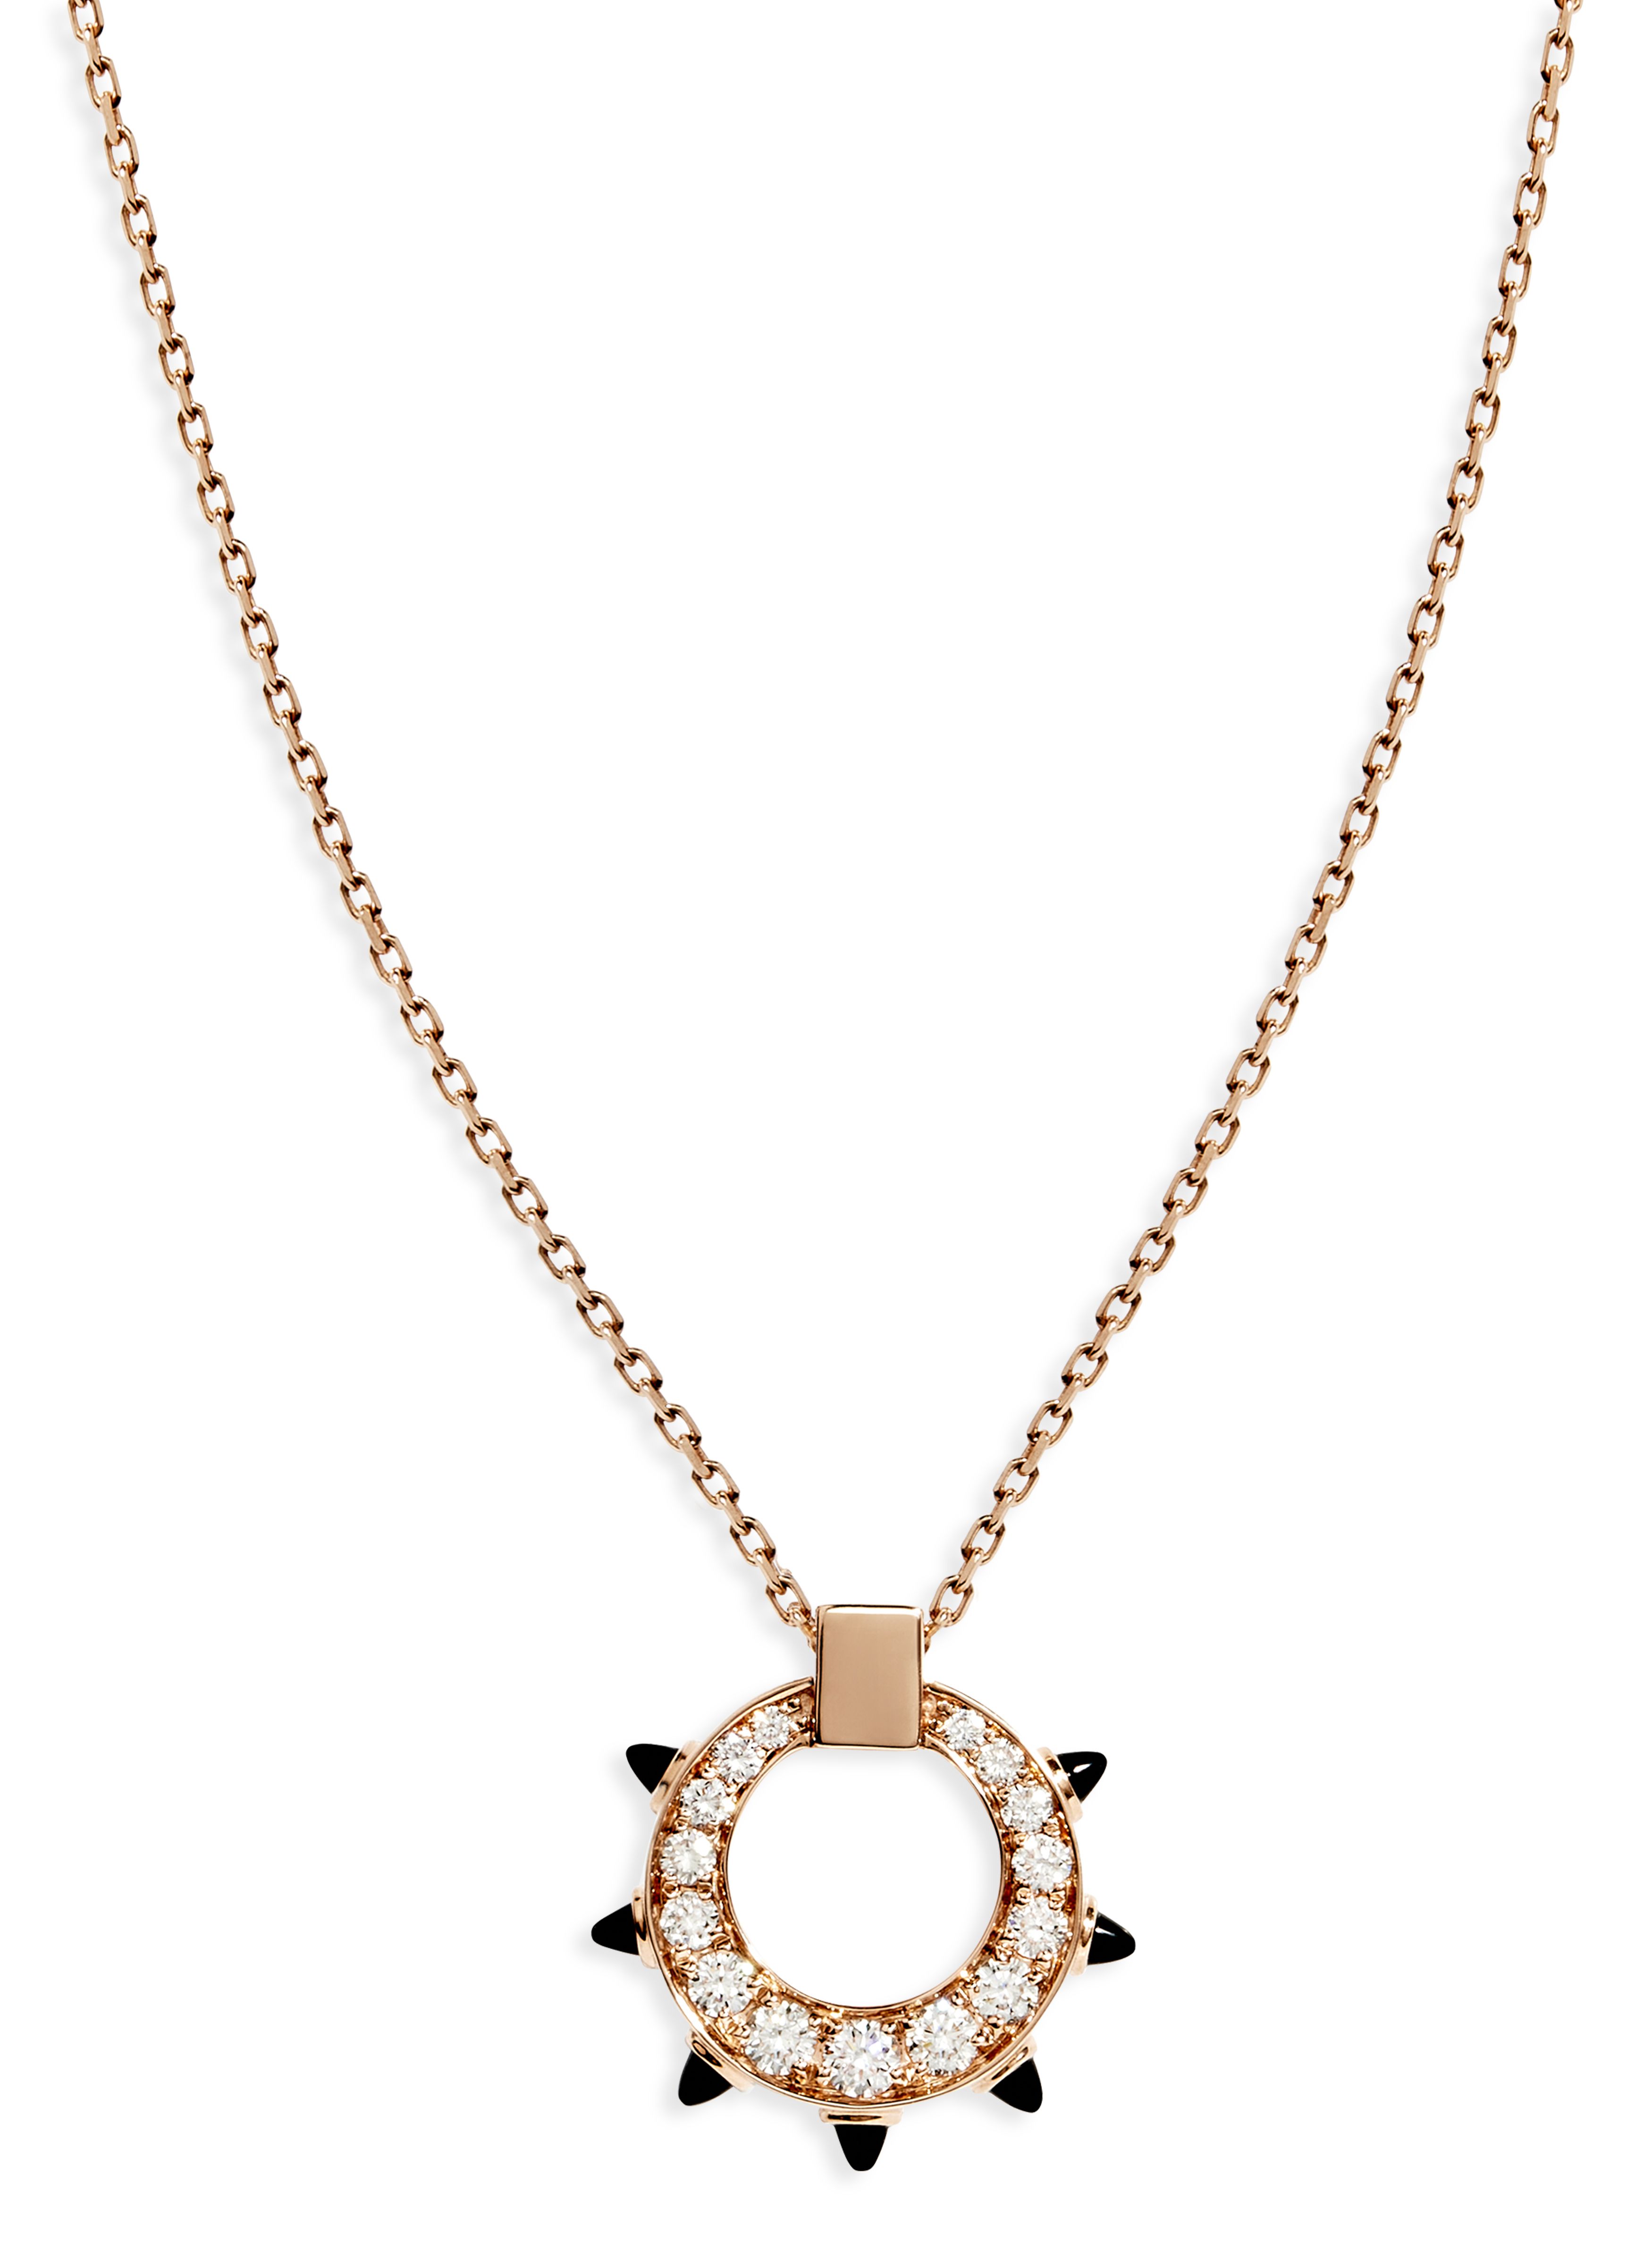  Spike round rose gold, black agate and diamond necklace